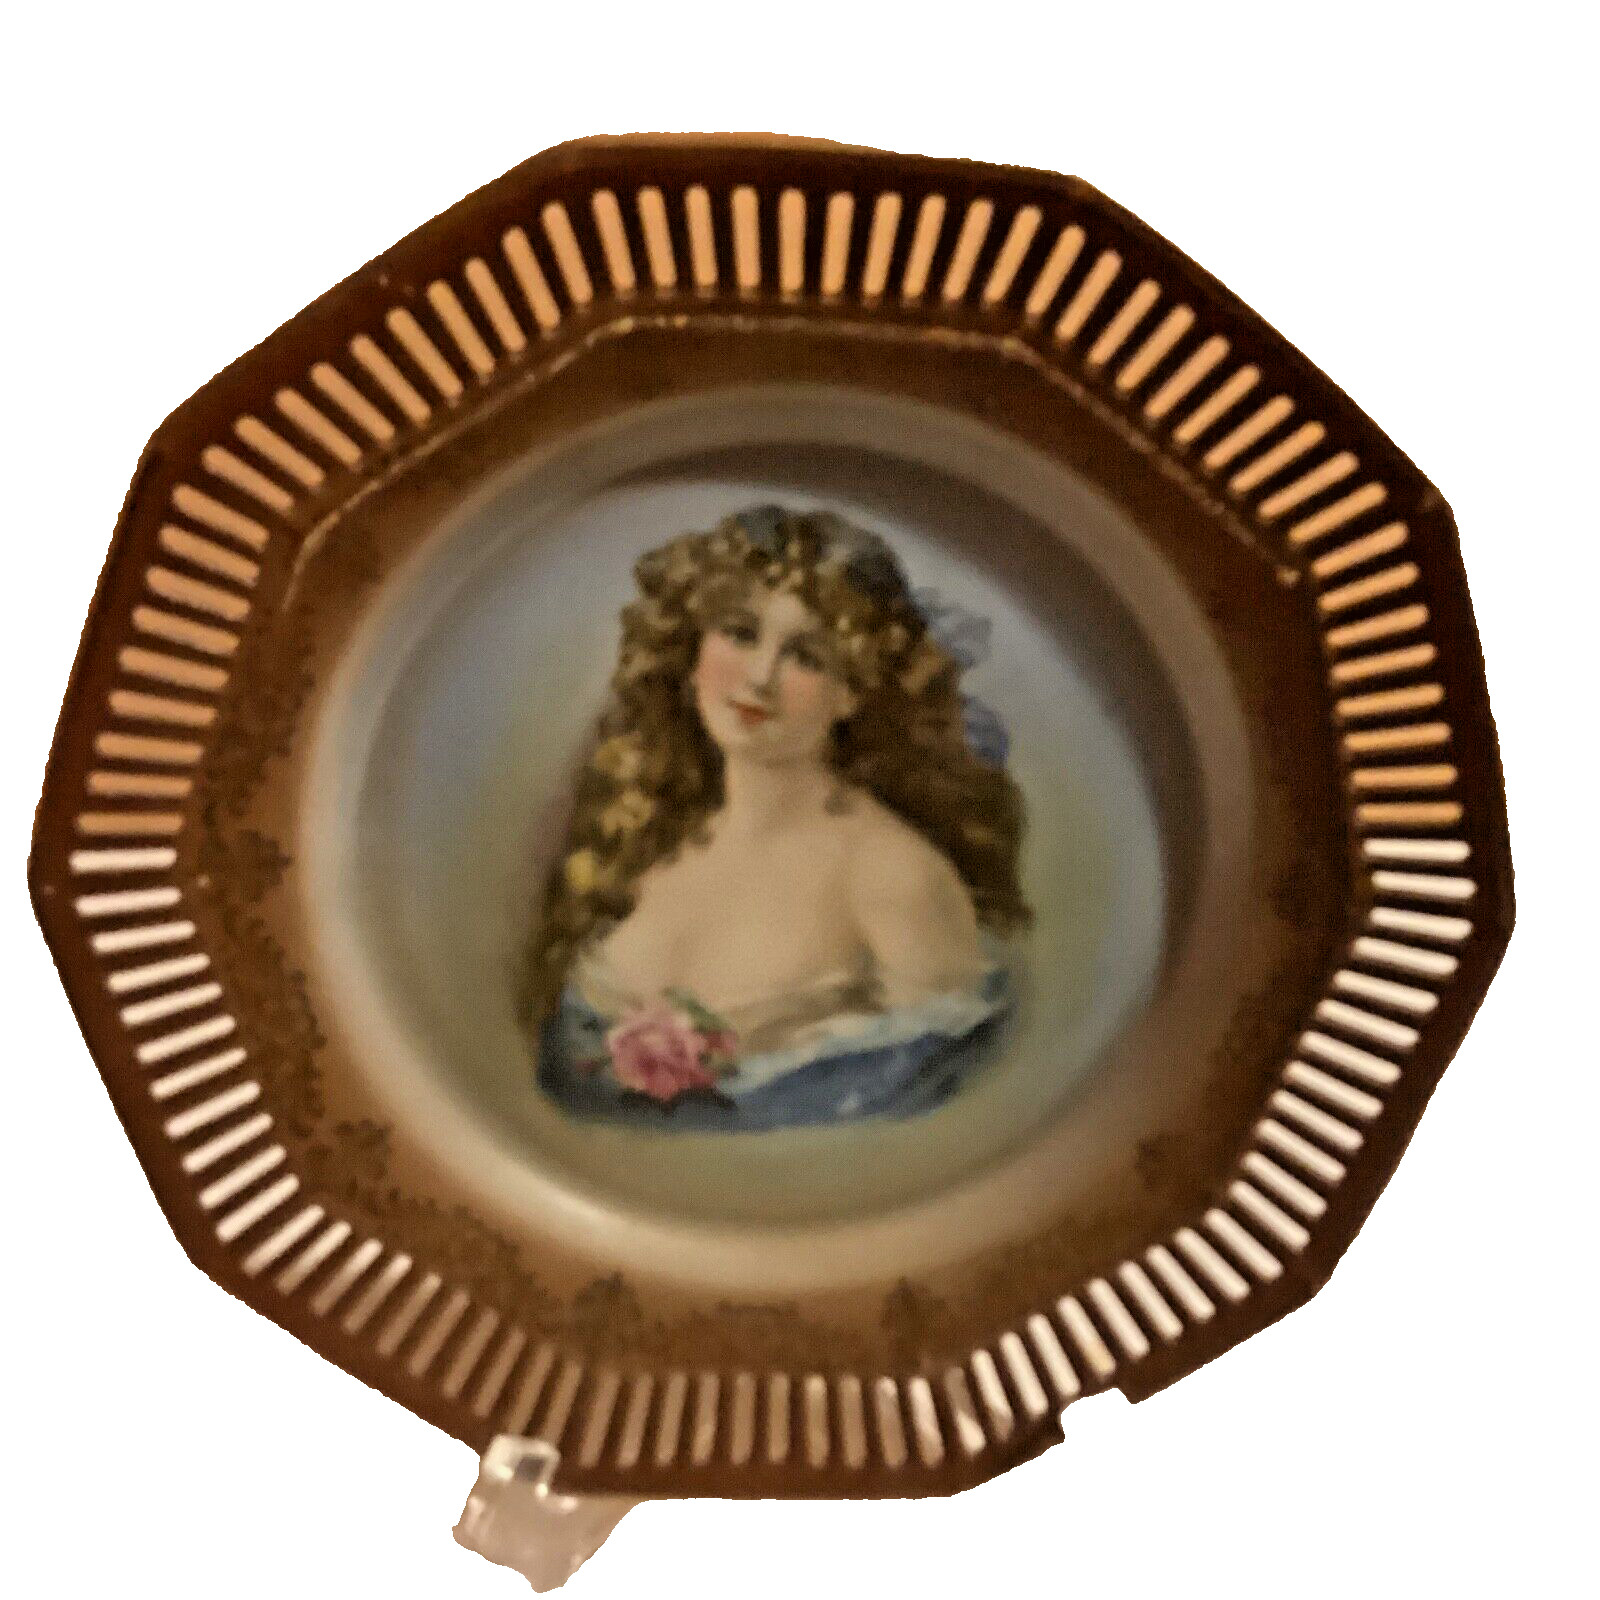 Vintage Schumann Germany Young Woman Portrait Reticulated Cabinet Plate